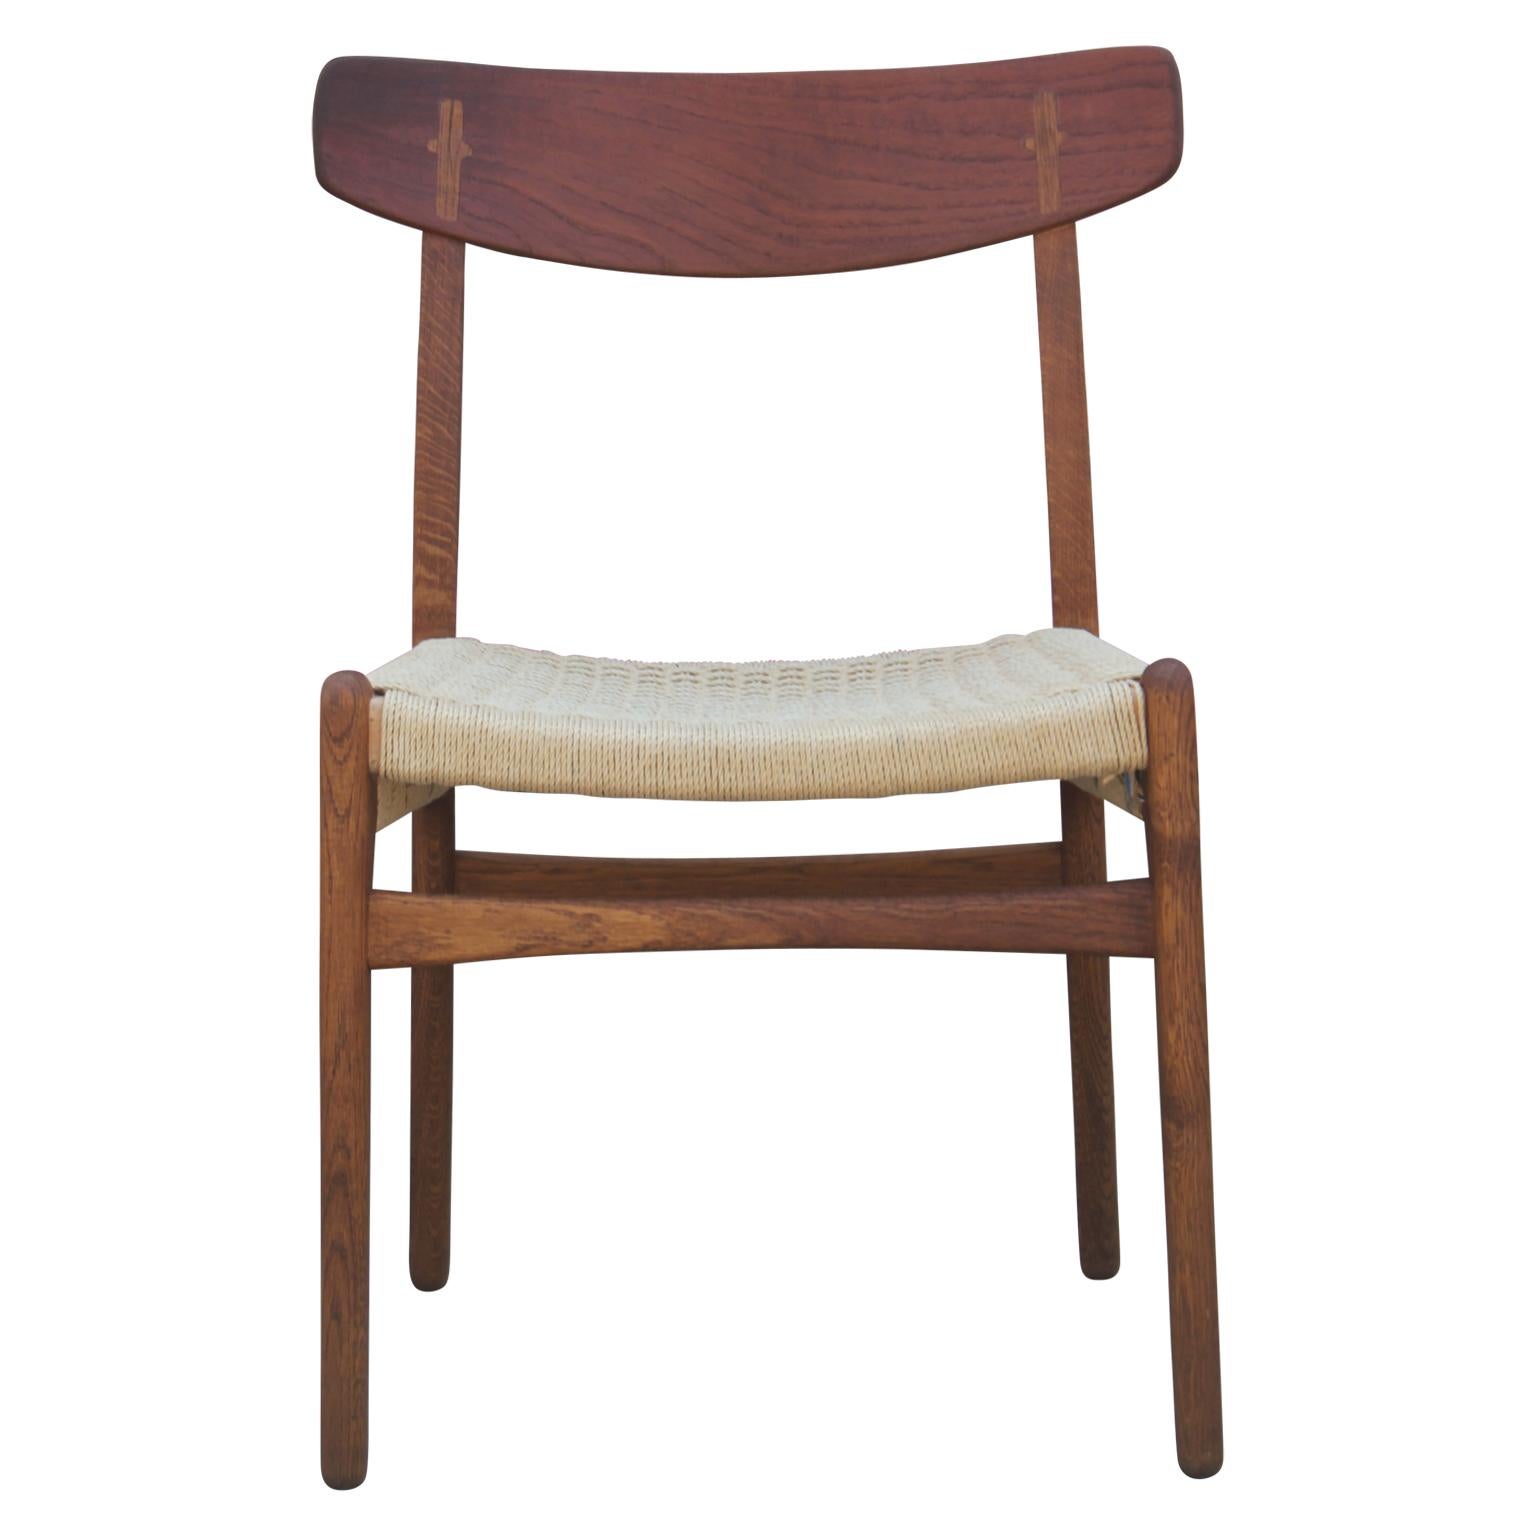 Set of four teak and woven cord dining chairs designed by Hans Wegner in 1951 and produced by Carl Hansen & Søn. Model number CH23.